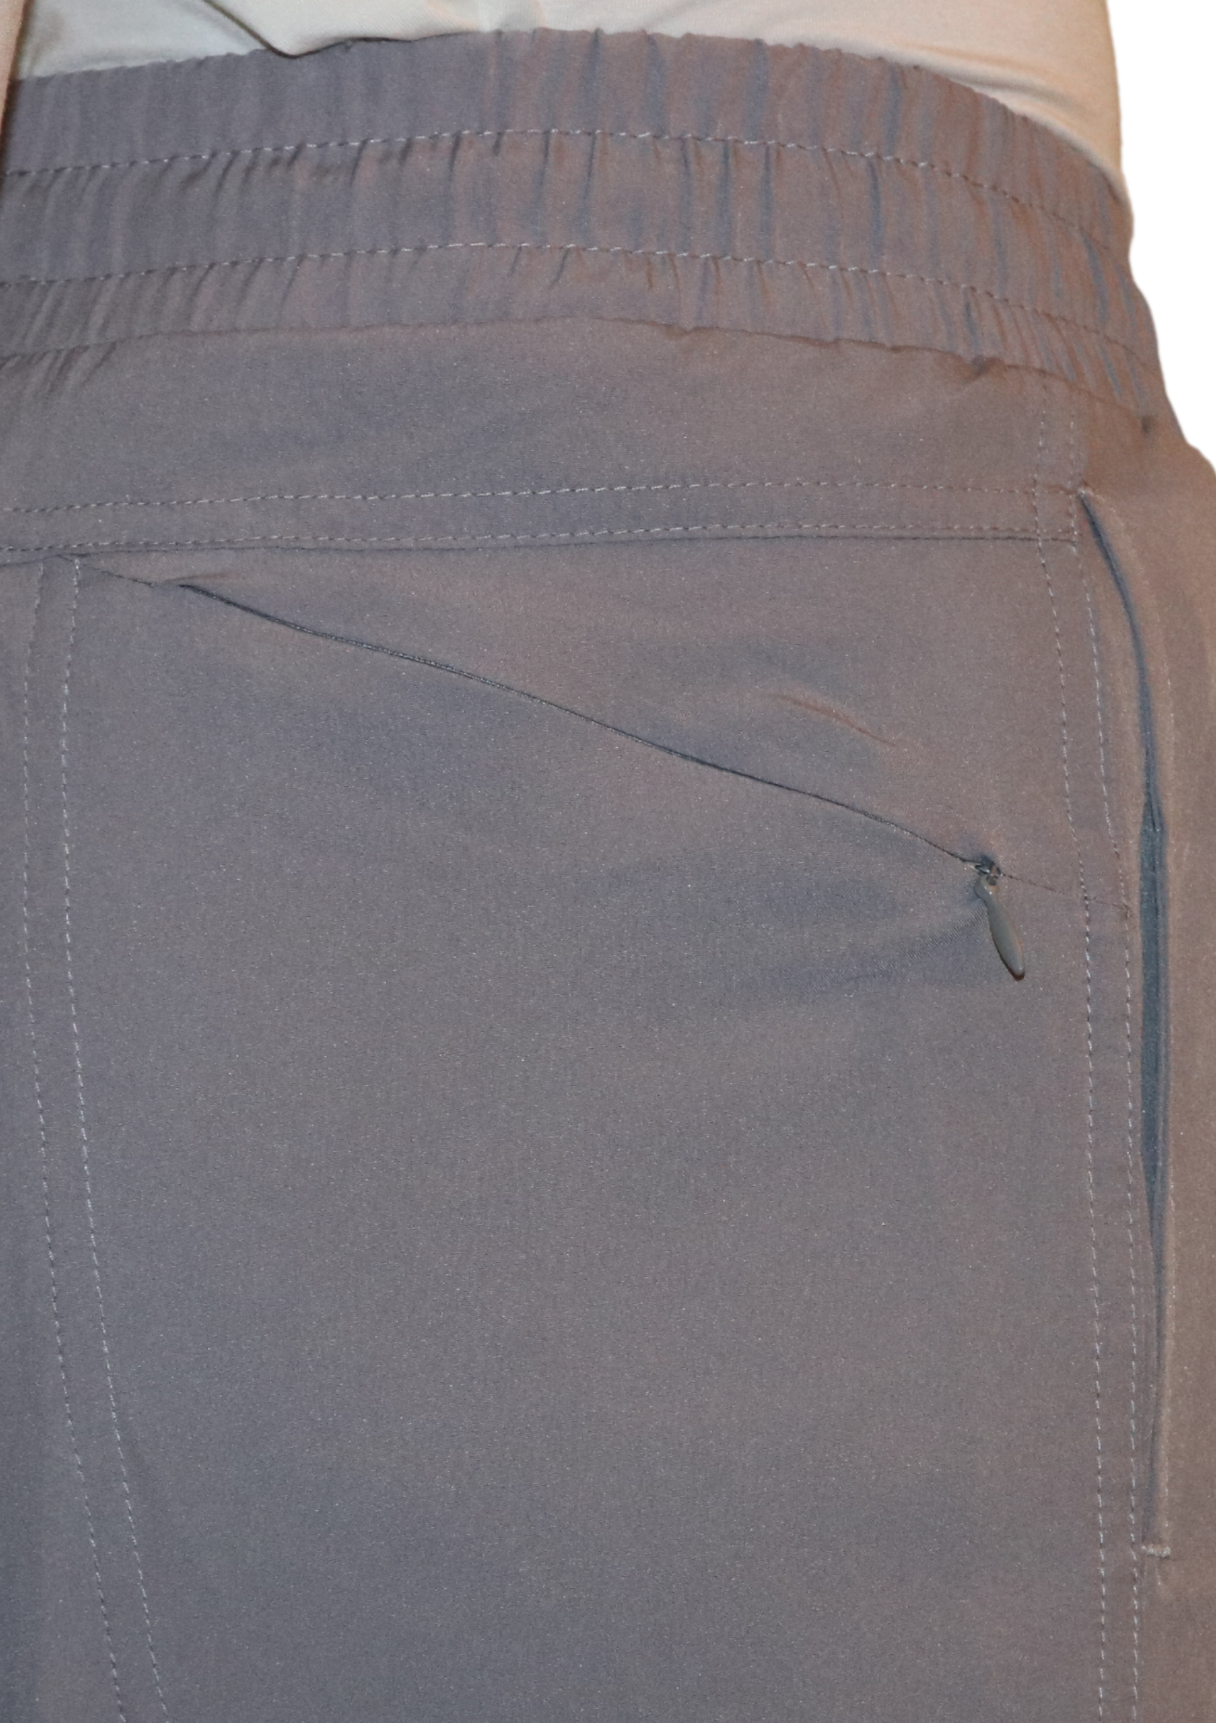 Back zipper pocket on the Bamboo Lined Sabalo Fishing Shorts. These fishing shorts are perfect for long days on the water.